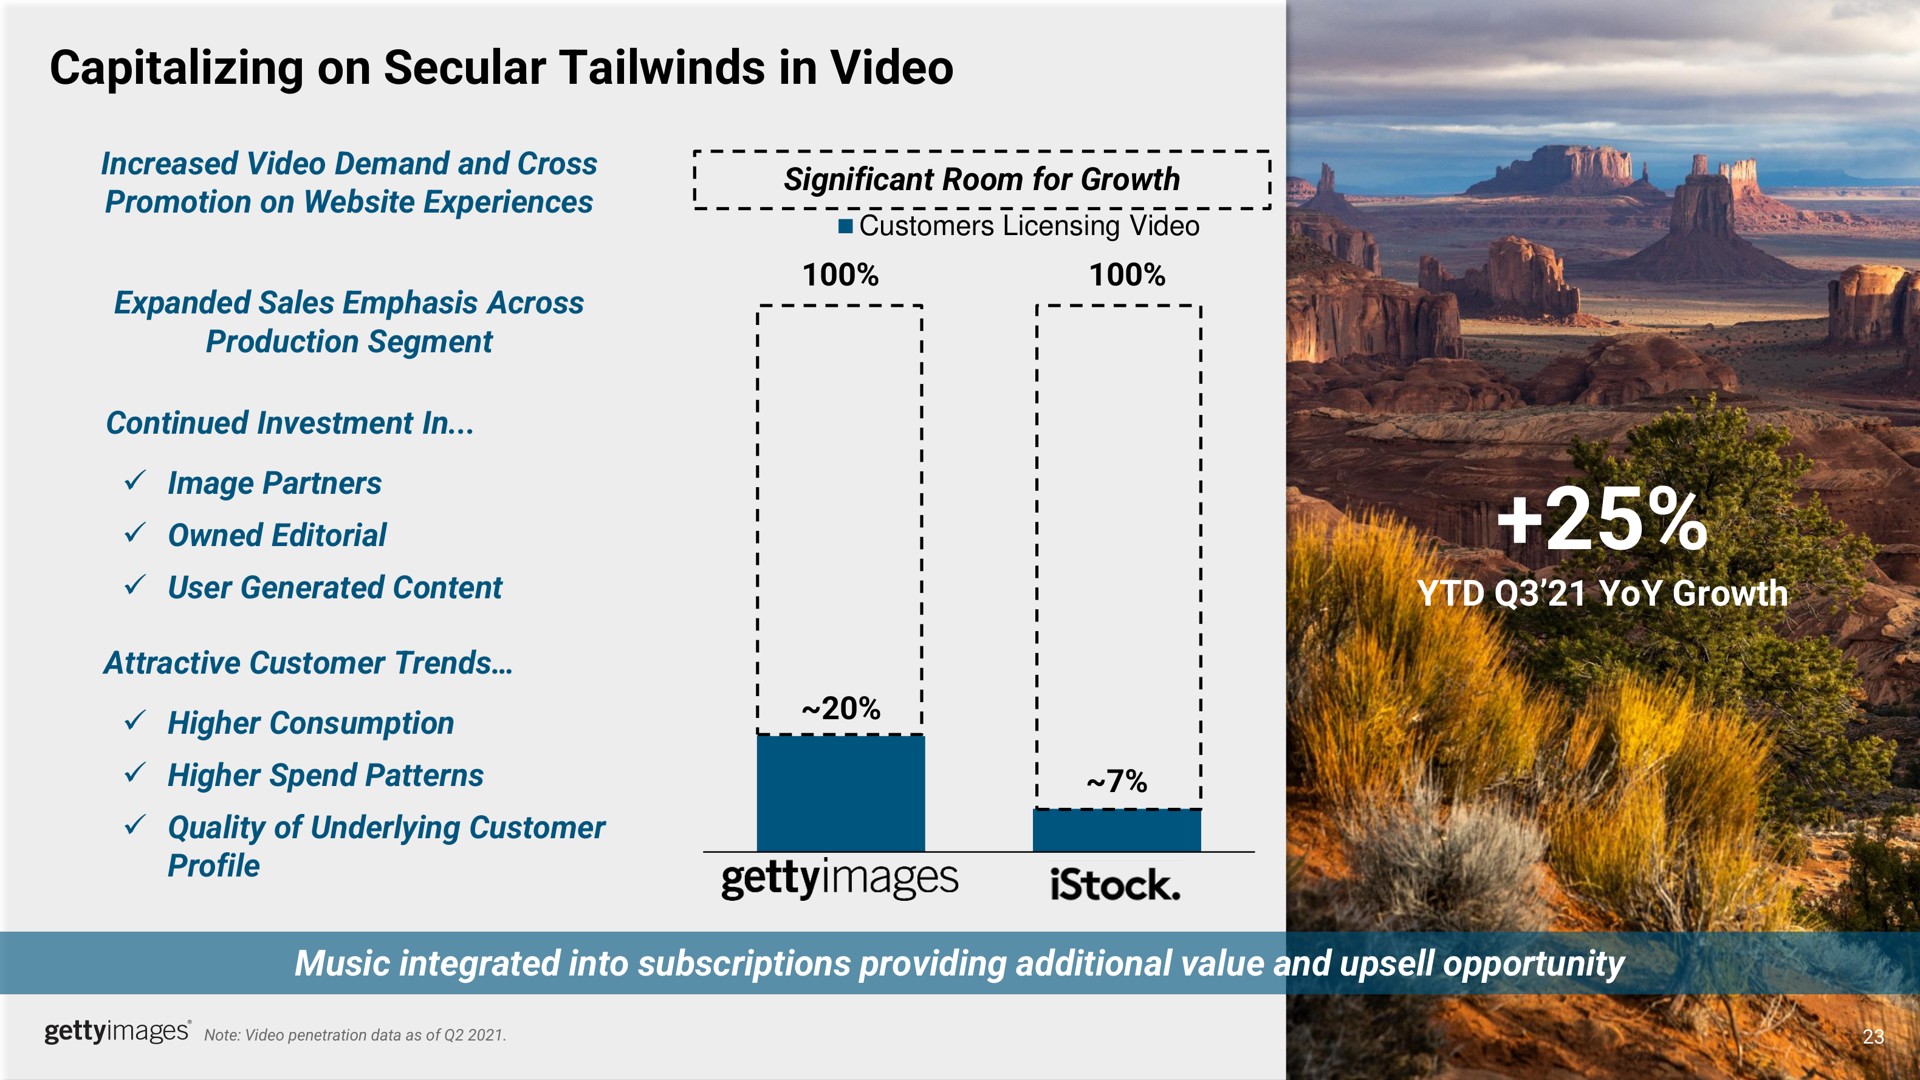 capitalizing on secular in video yoy growth music integrated into subscriptions providing additional value and opportunity higher consumption a spa | Getty